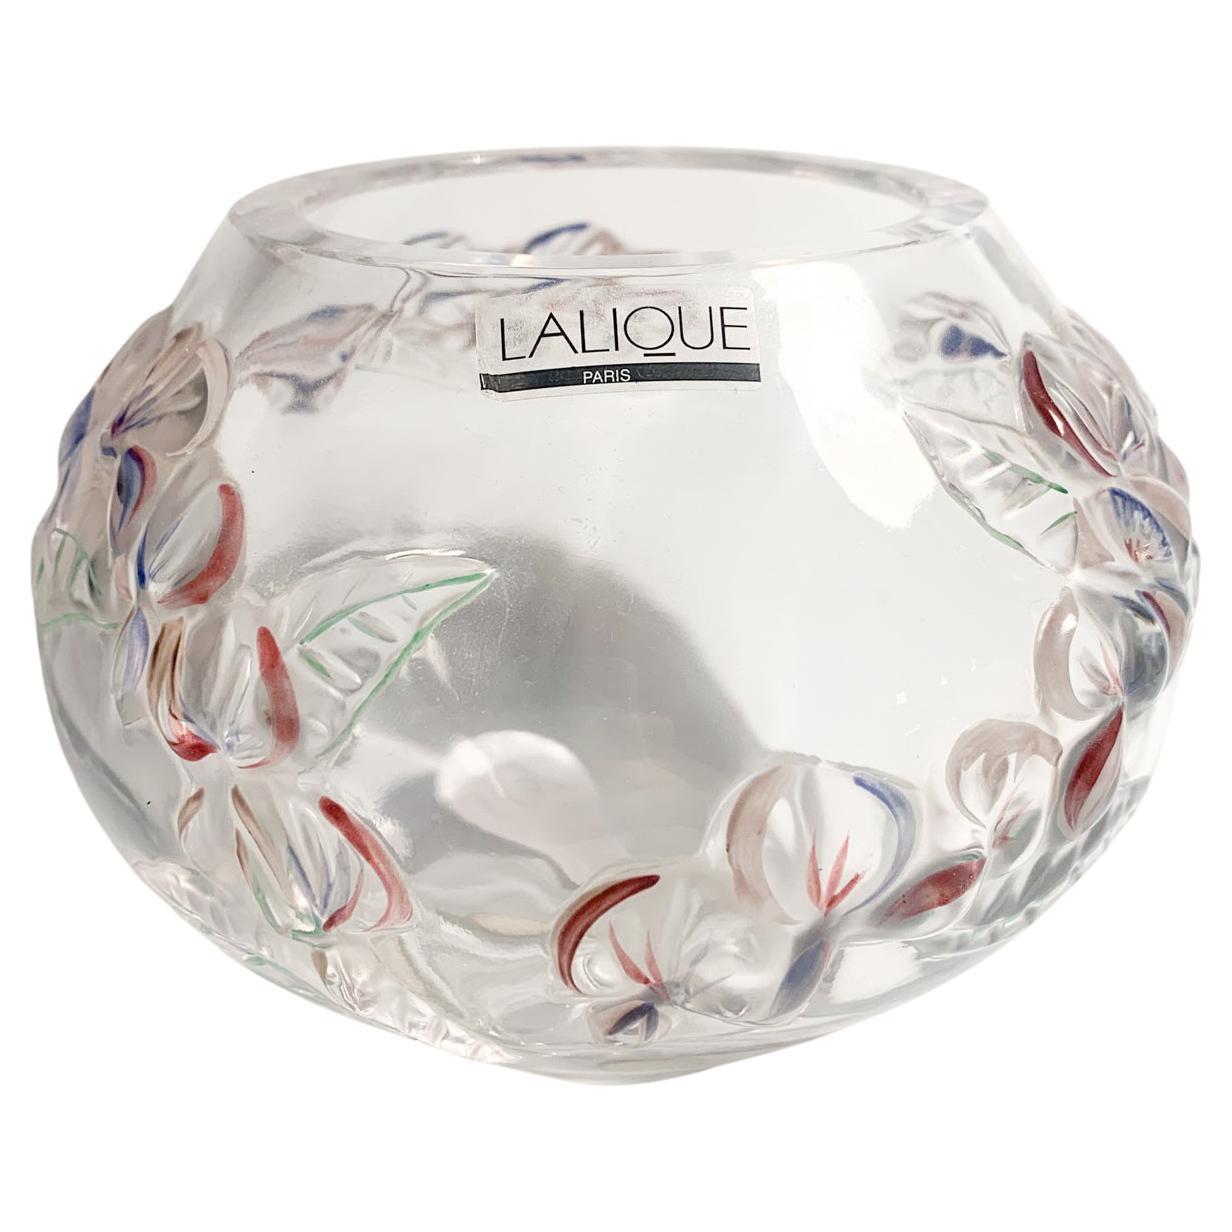 Lalique Crystal Vase with Colored Flowers from the, 50s